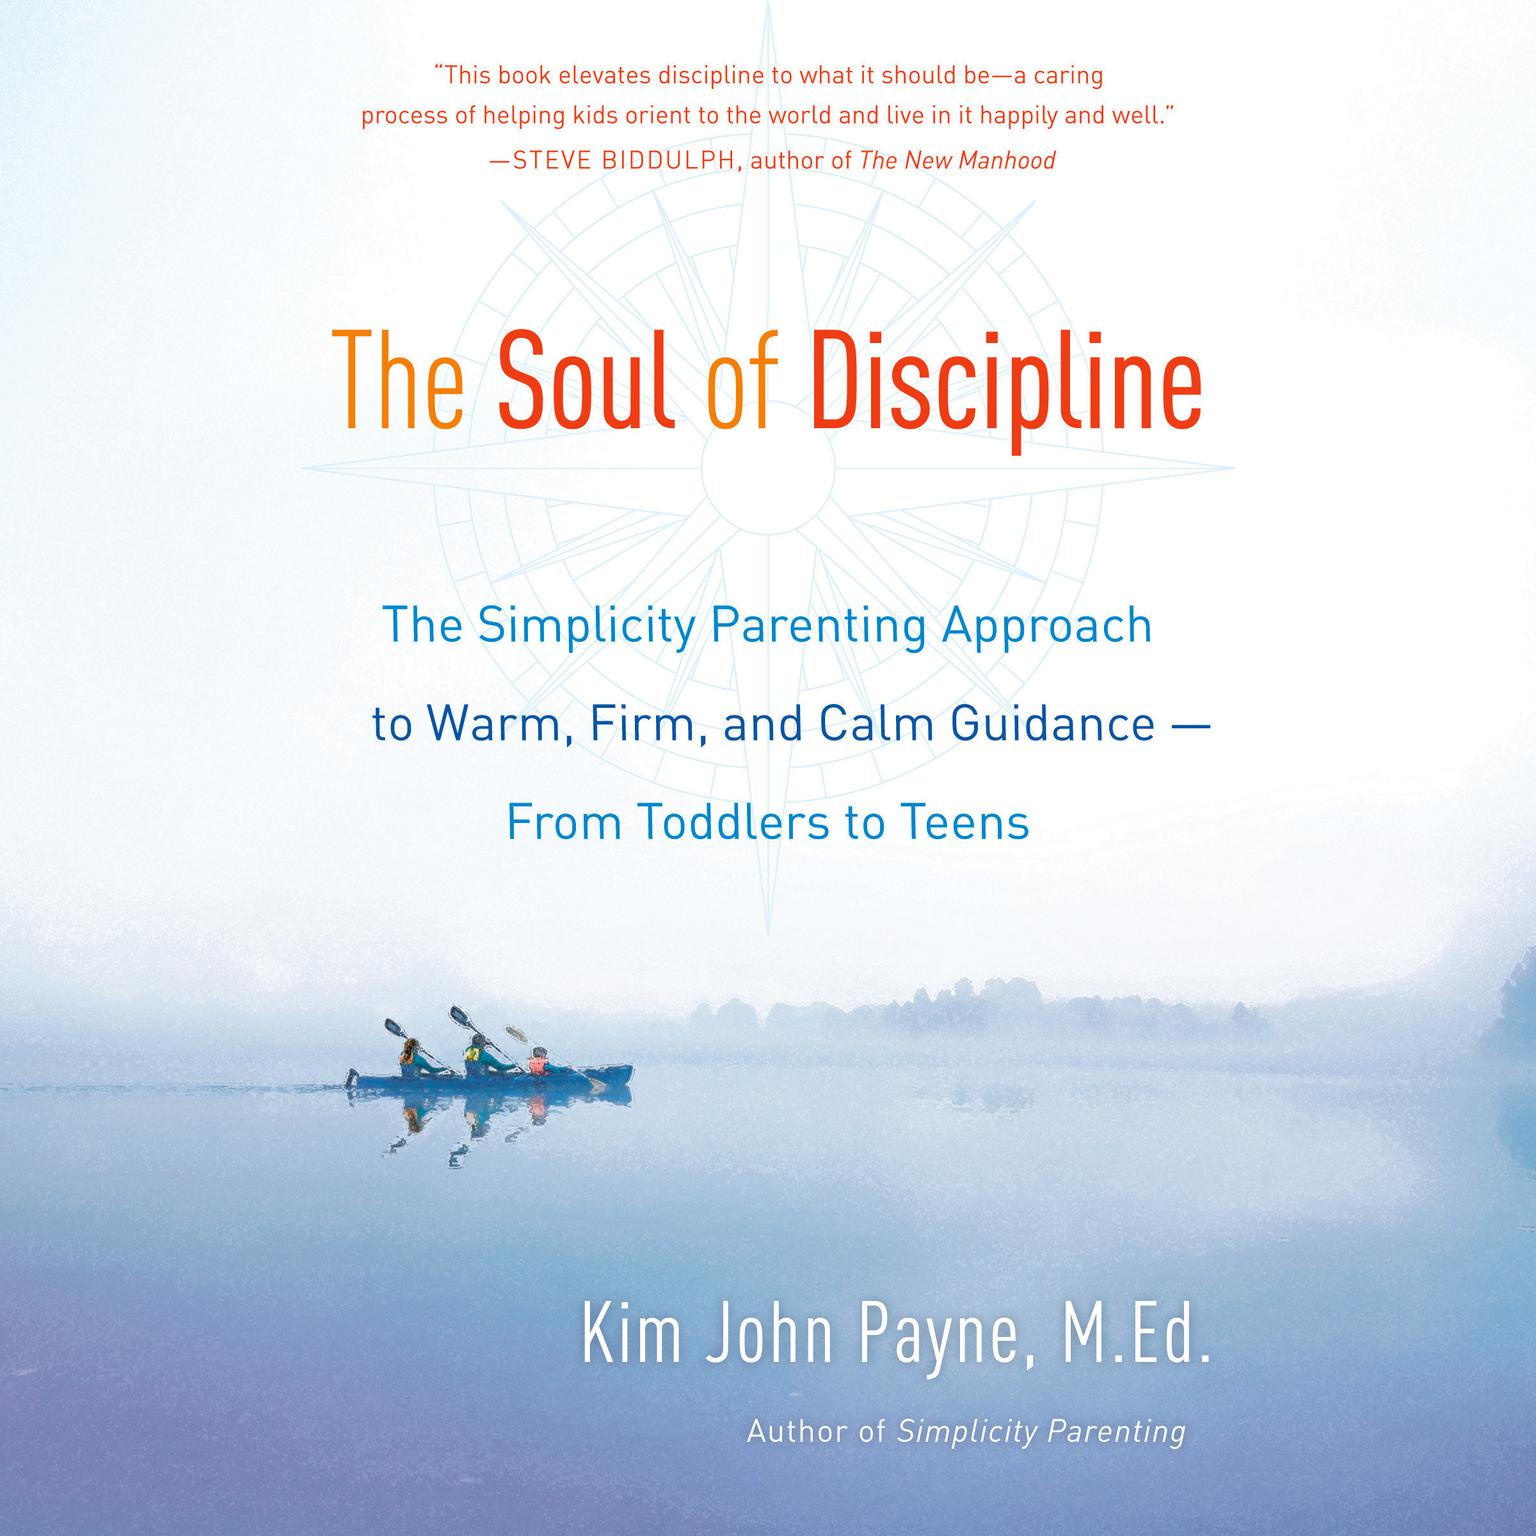 The Soul of Discipline: The Simplicity Parenting Approach to Warm, Firm, and Calm Guidance -- From Toddlers to Teens Audiobook, by Kim John Payne